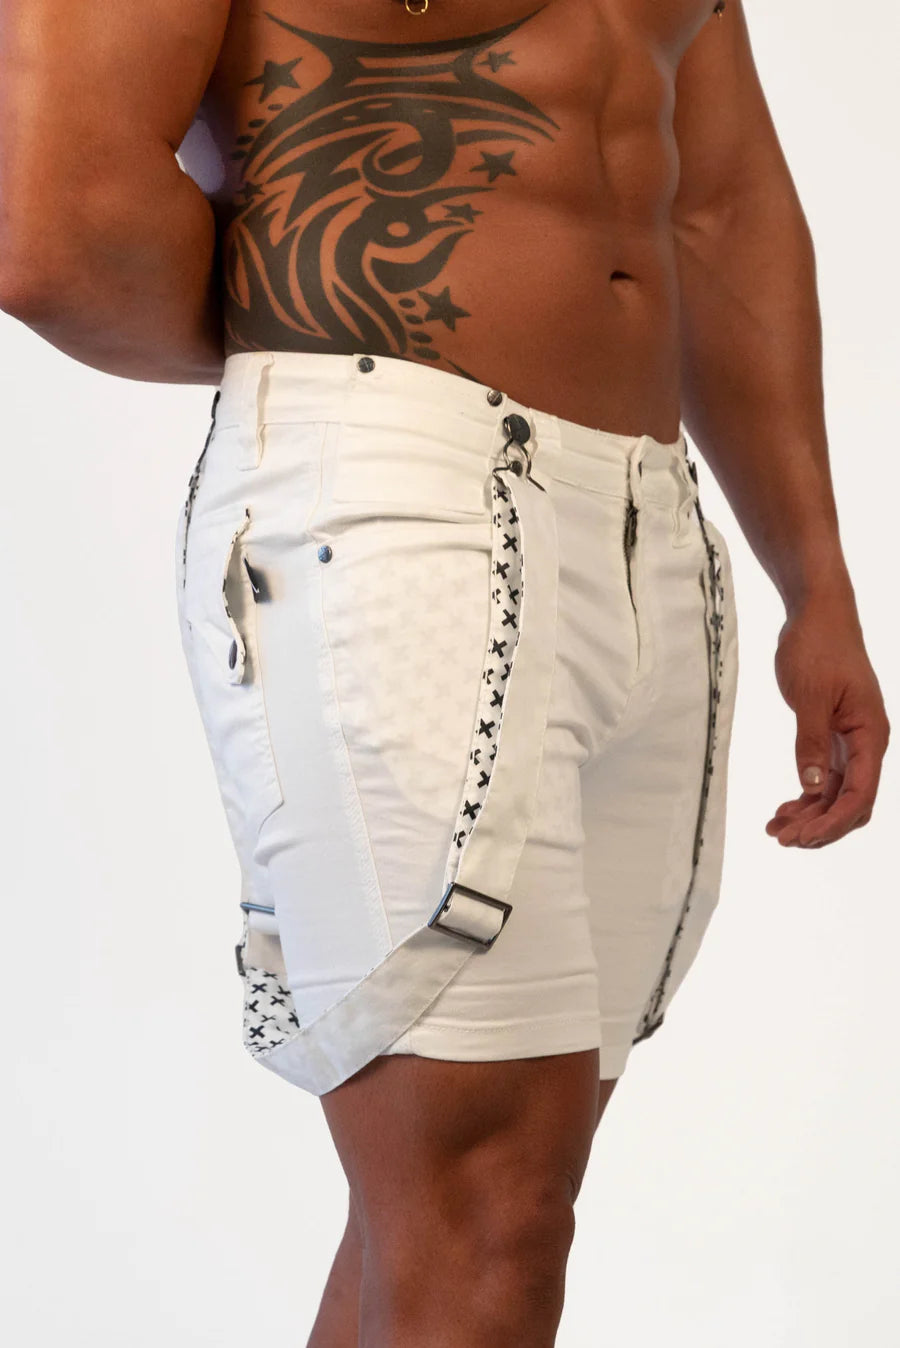 Wade Strapped Shorts (White)